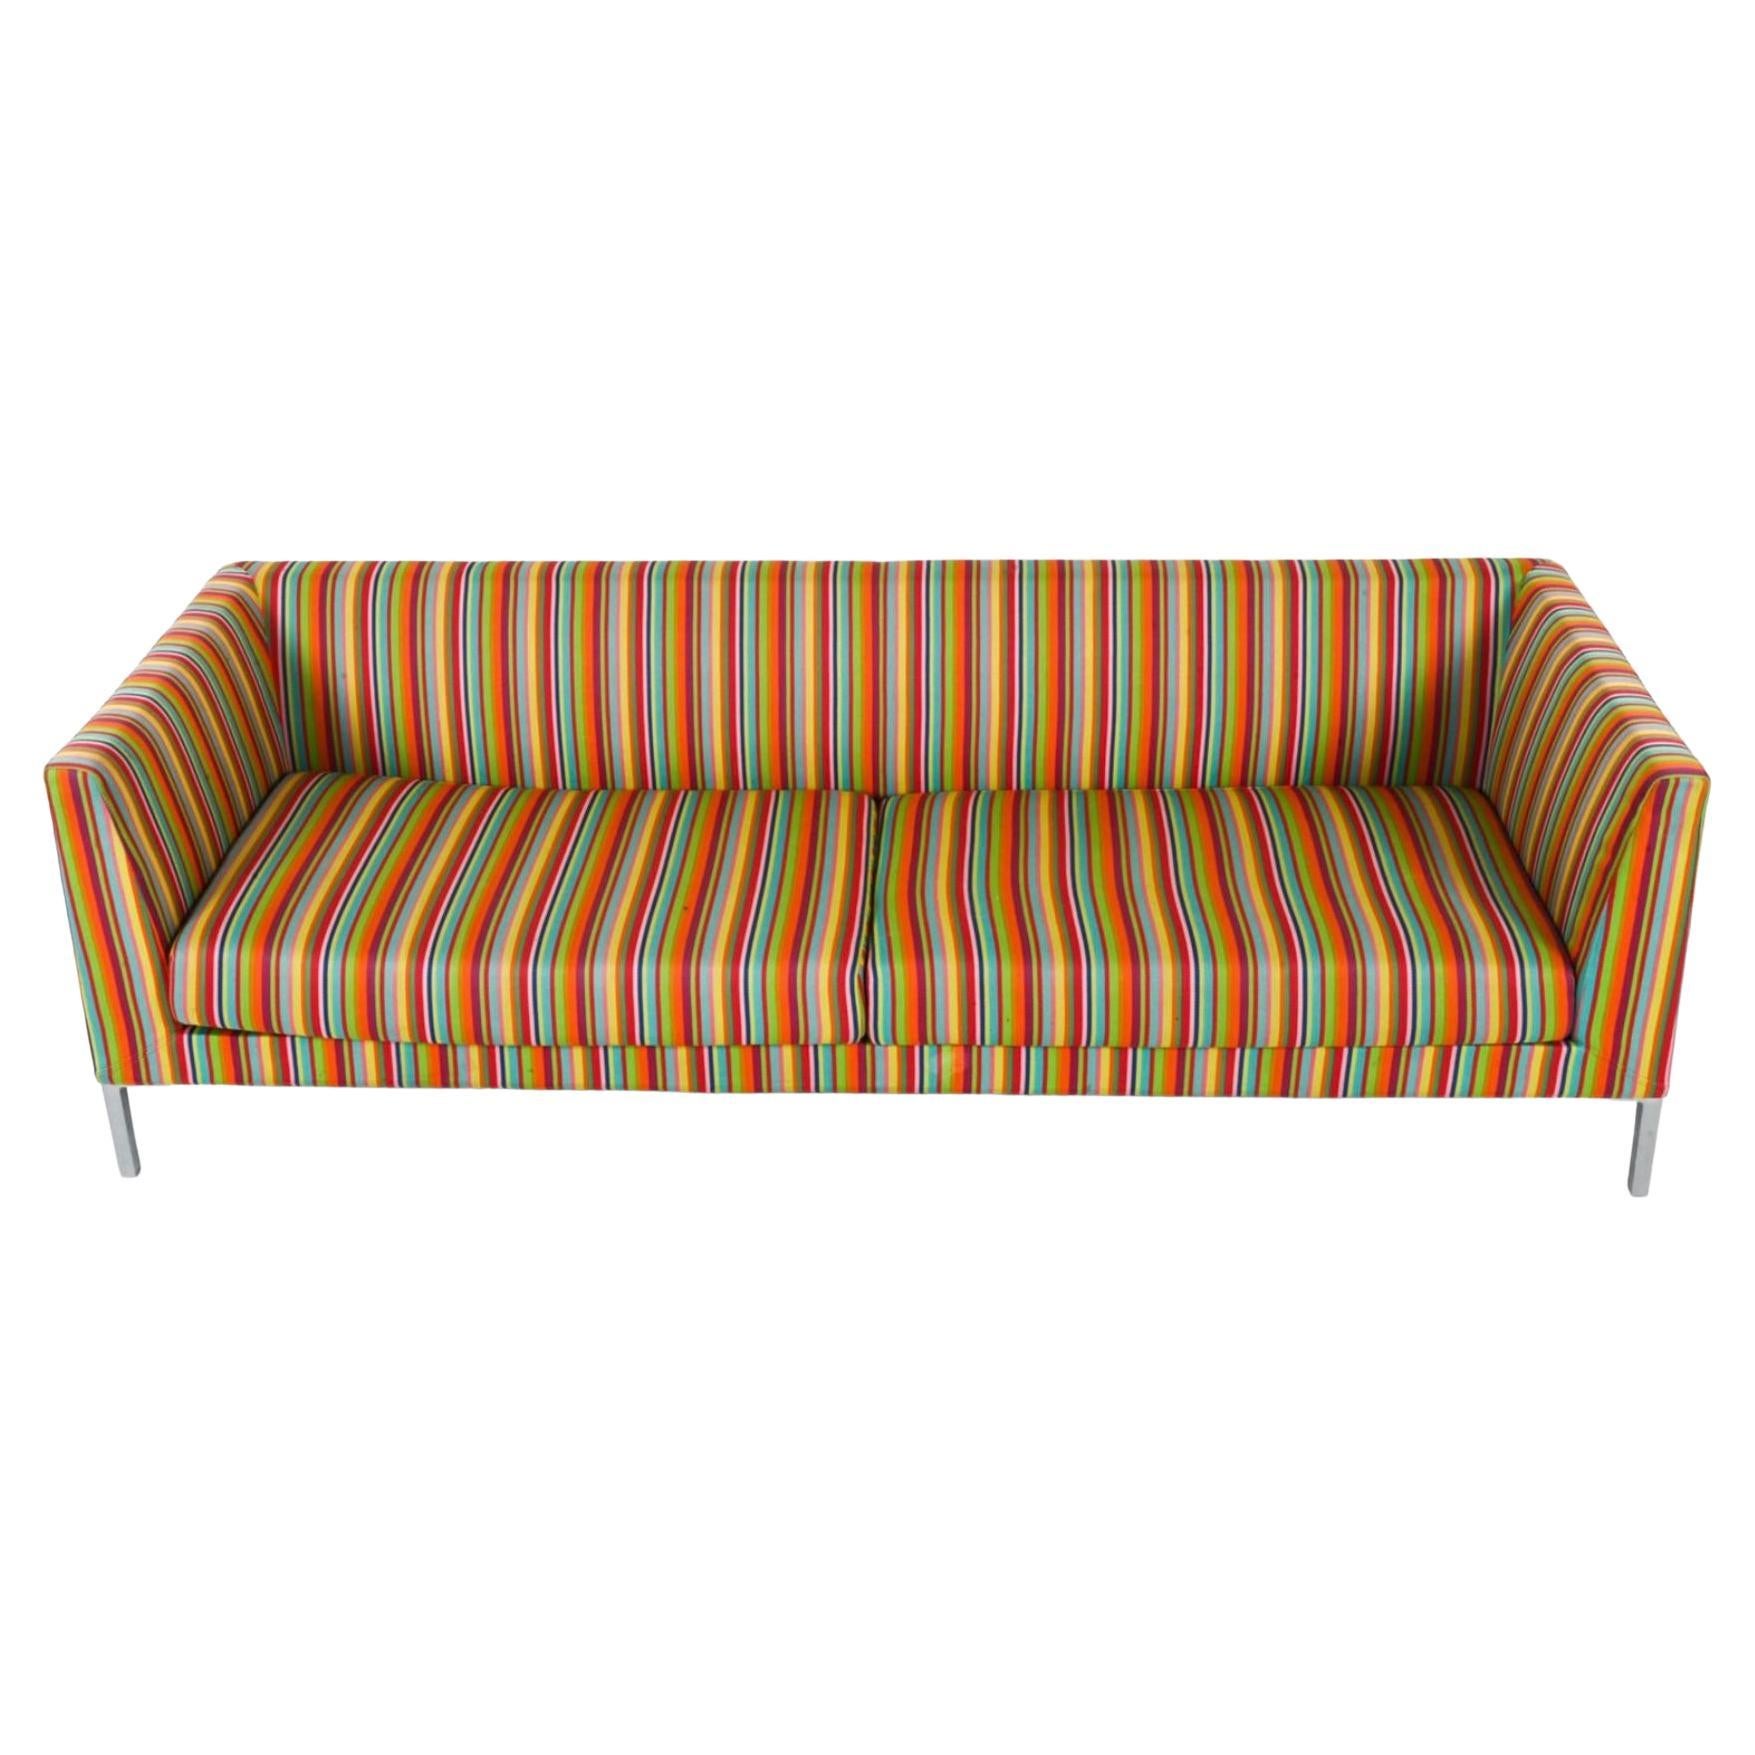 Danish Modern 3 seat long sofa from the Paustian Lounge Series designed by Johannes Foersom and Peter Hiort-Lorenzen for Tivoli and Paustian. This Modern sofa has satin-finished aluminum legs and a very colorful striped twill fabric. Manufacturing